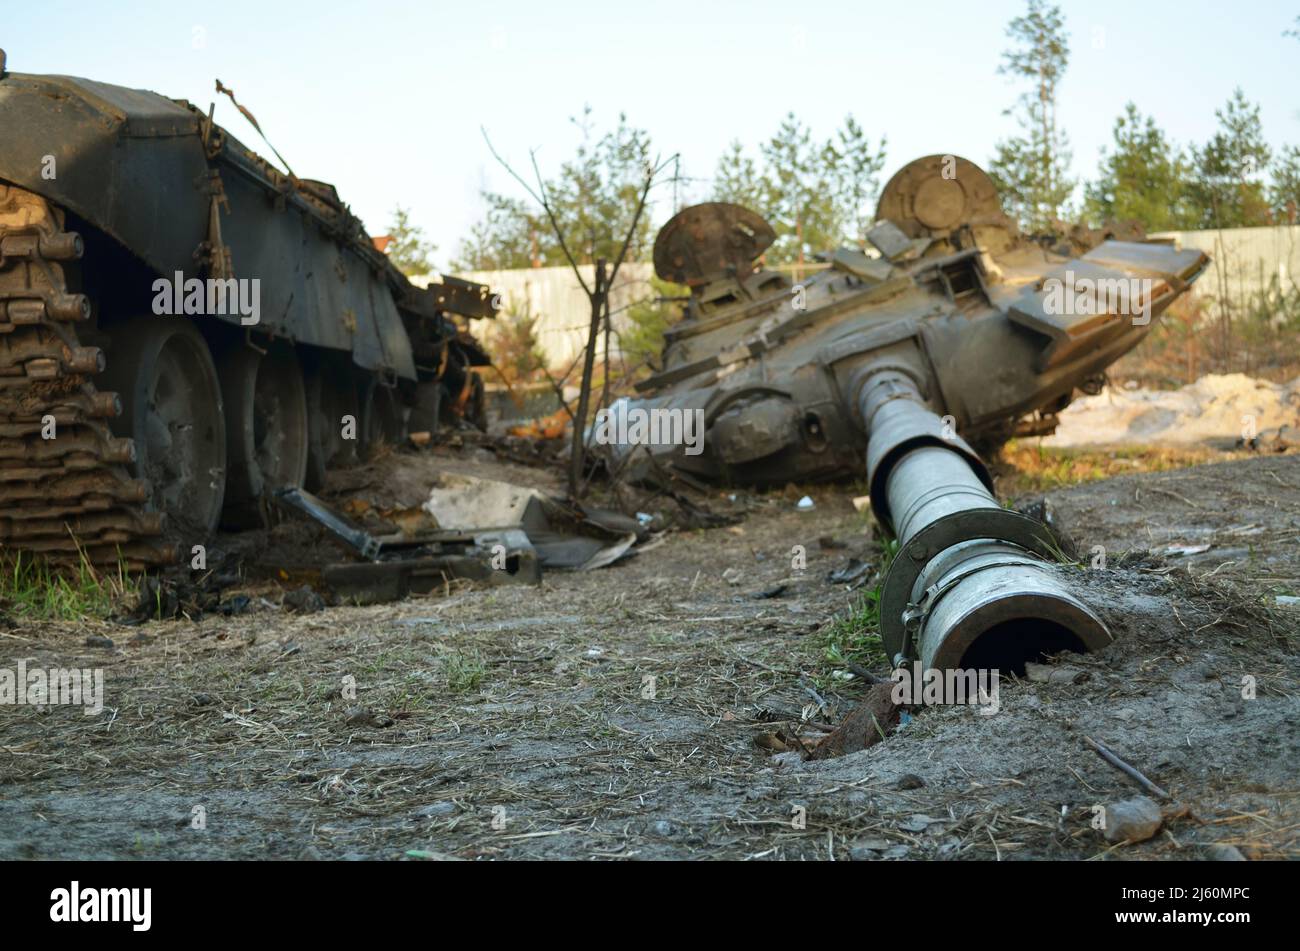 Dmytrivka, Ukraine - April 14, 2022: Tank turret of destroyed military equipment of the Russian army following the Ukrainian forces counter-attacks. Stock Photo